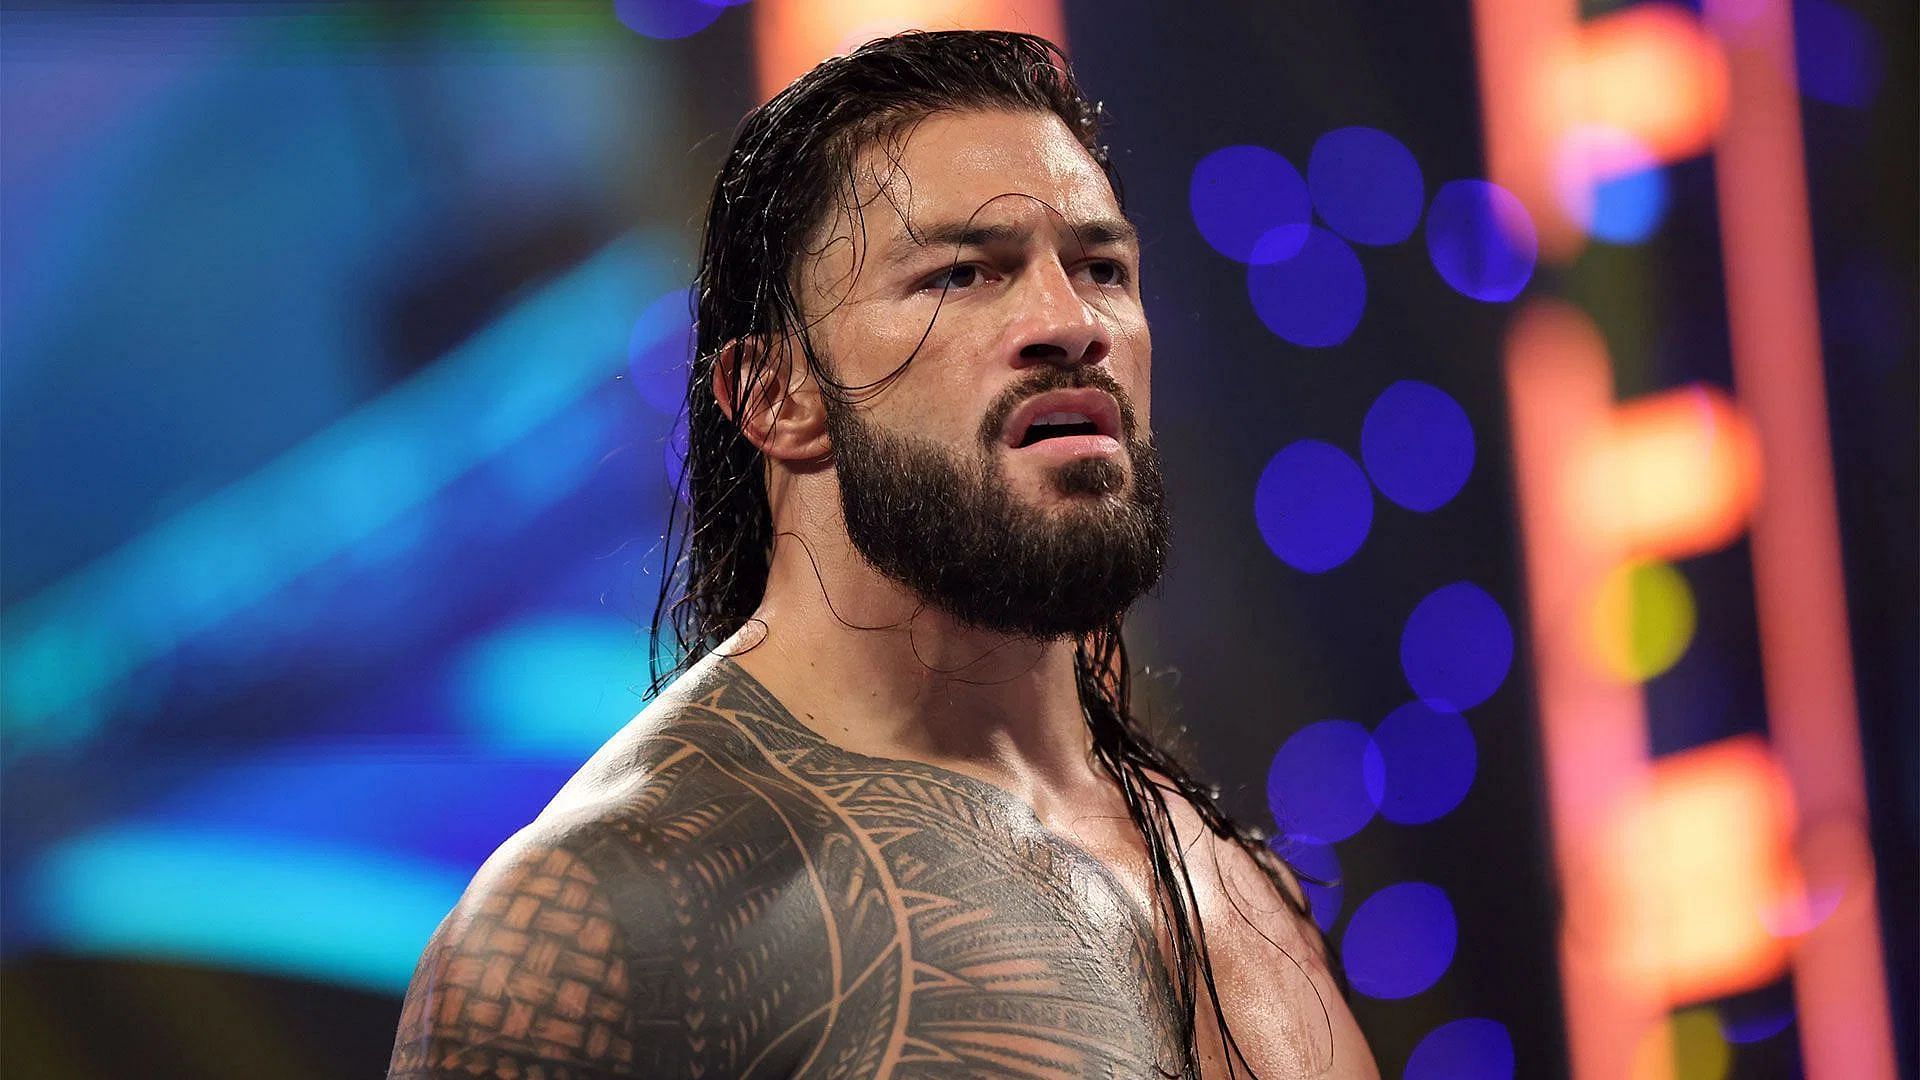 Reigns will be in action on the road to WrestleMania 39